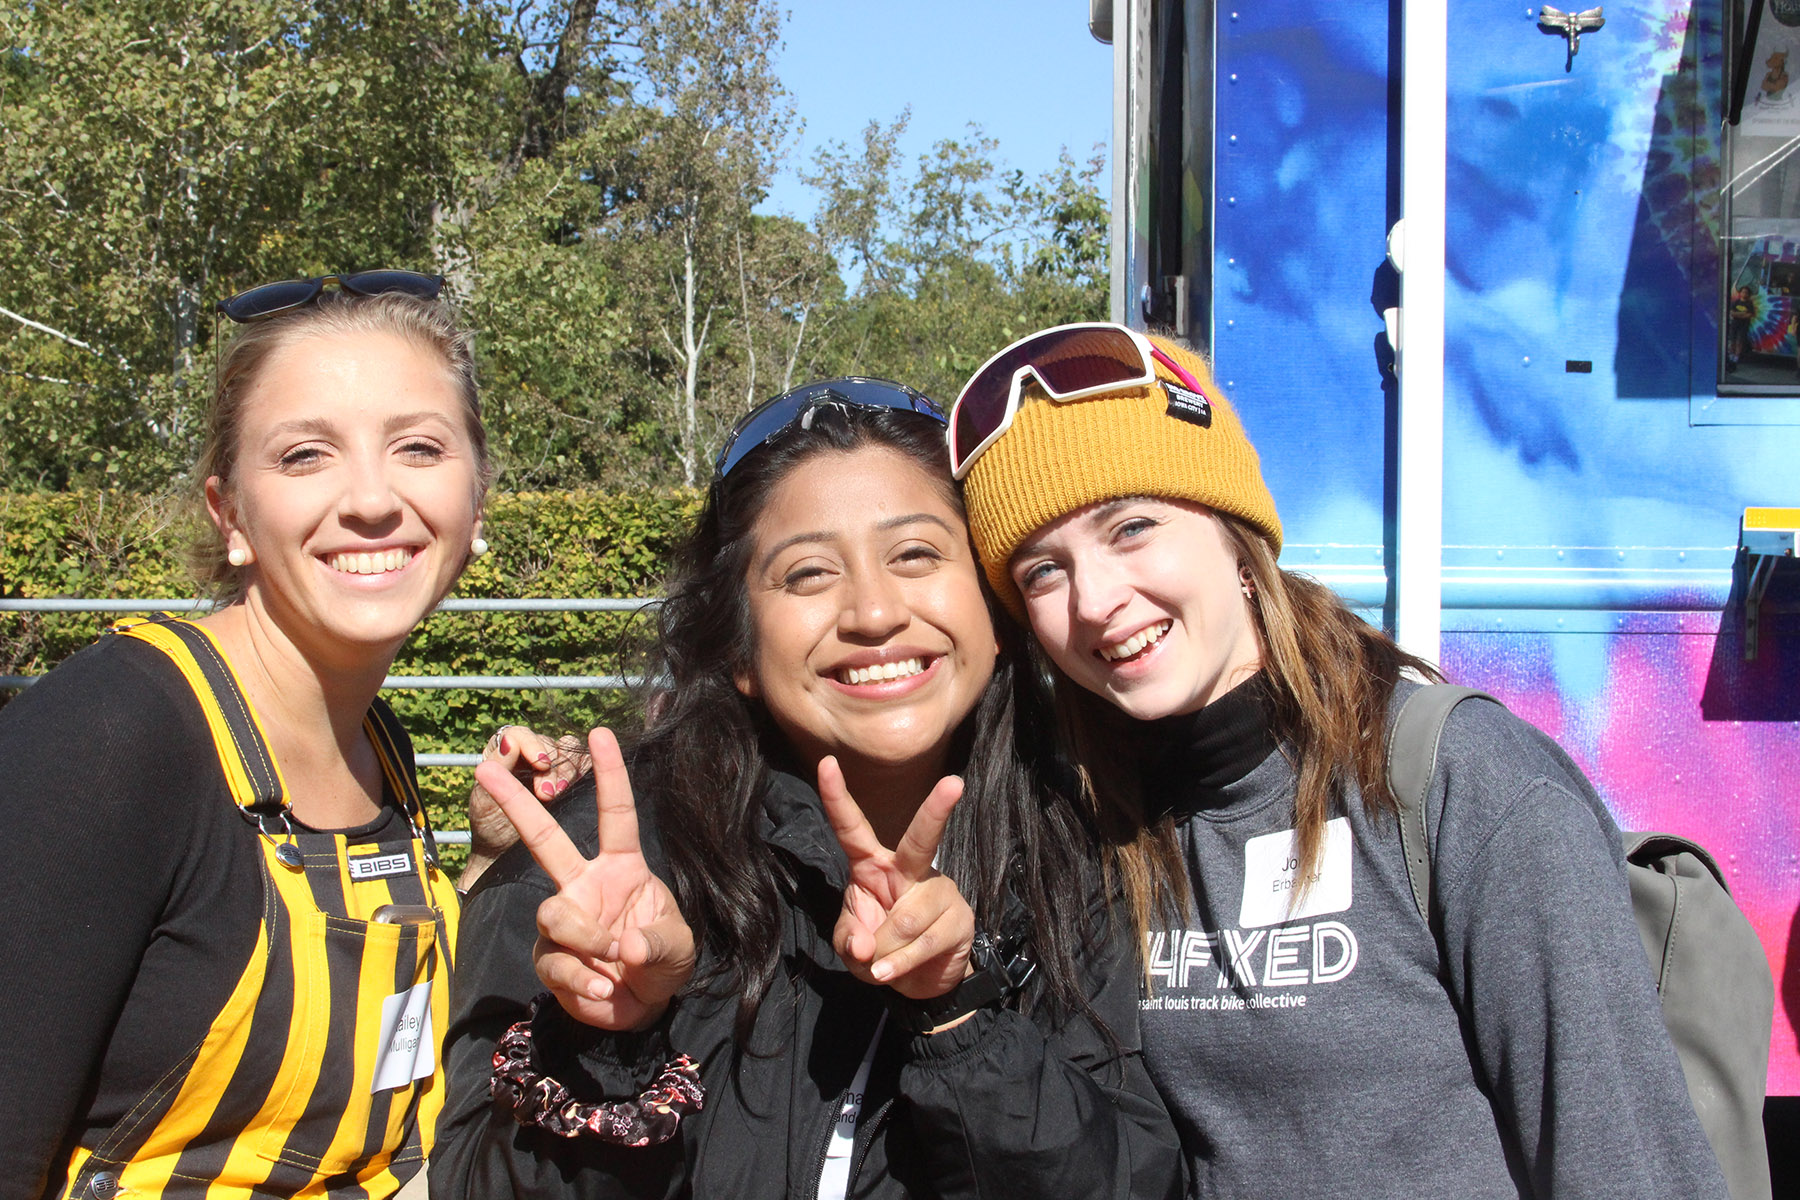 Three smiling young women dressed in black and gold colors at Iowa's homecoming